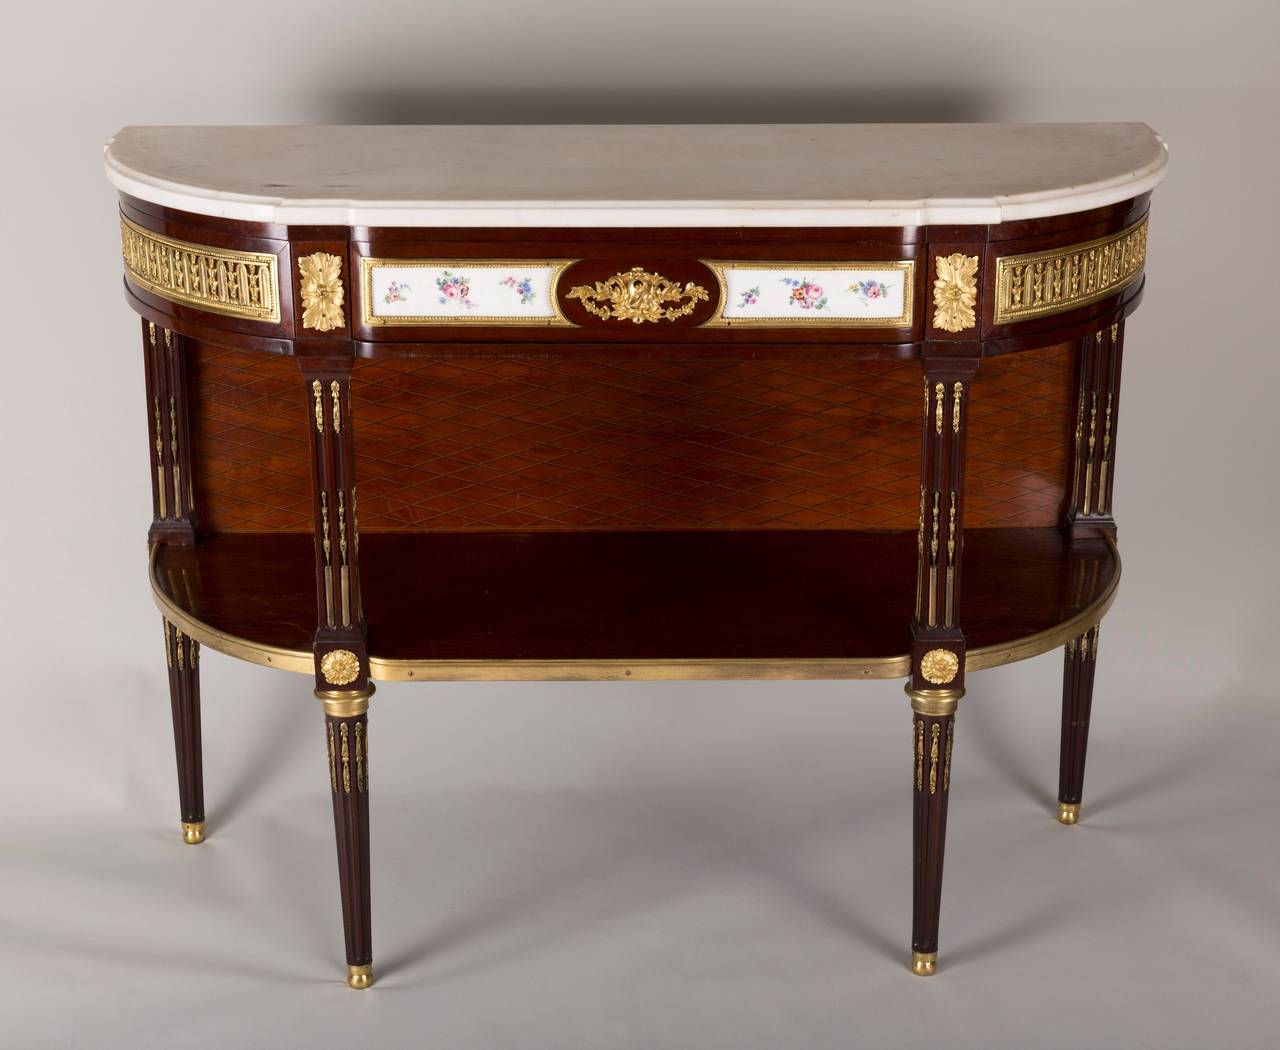 This exceptional console in satin wood with lattice pattern opens with one large central drawers covered with Sèvres plate and ormolu and two swinging side drawers.

The four legs are in pilaster ornate with ormolu mantel bronze.

Work from the